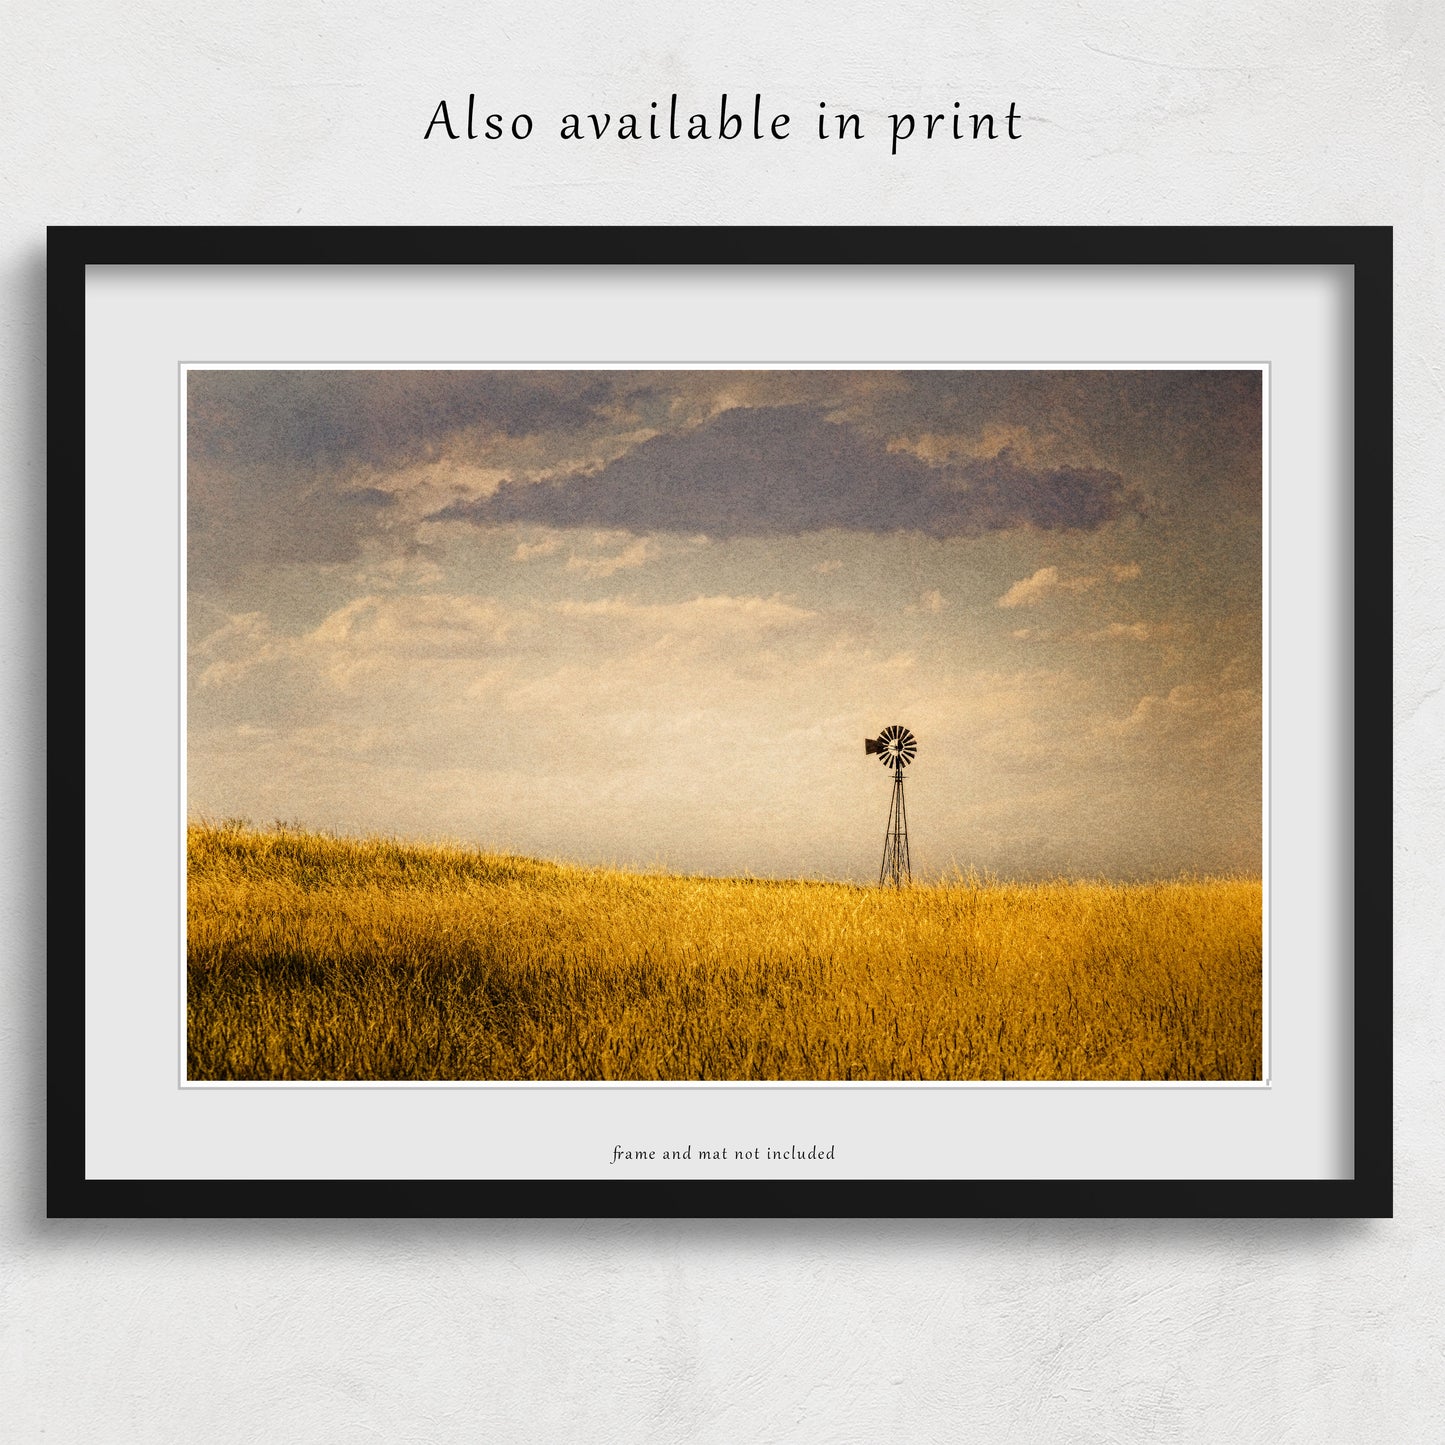 The Nebraska windmill photograph is beautifully presented as a framed print, showing this photograph is also available as a paper print. Please note that the frame and mat shown are for display purposes only and are not included in the purchase.